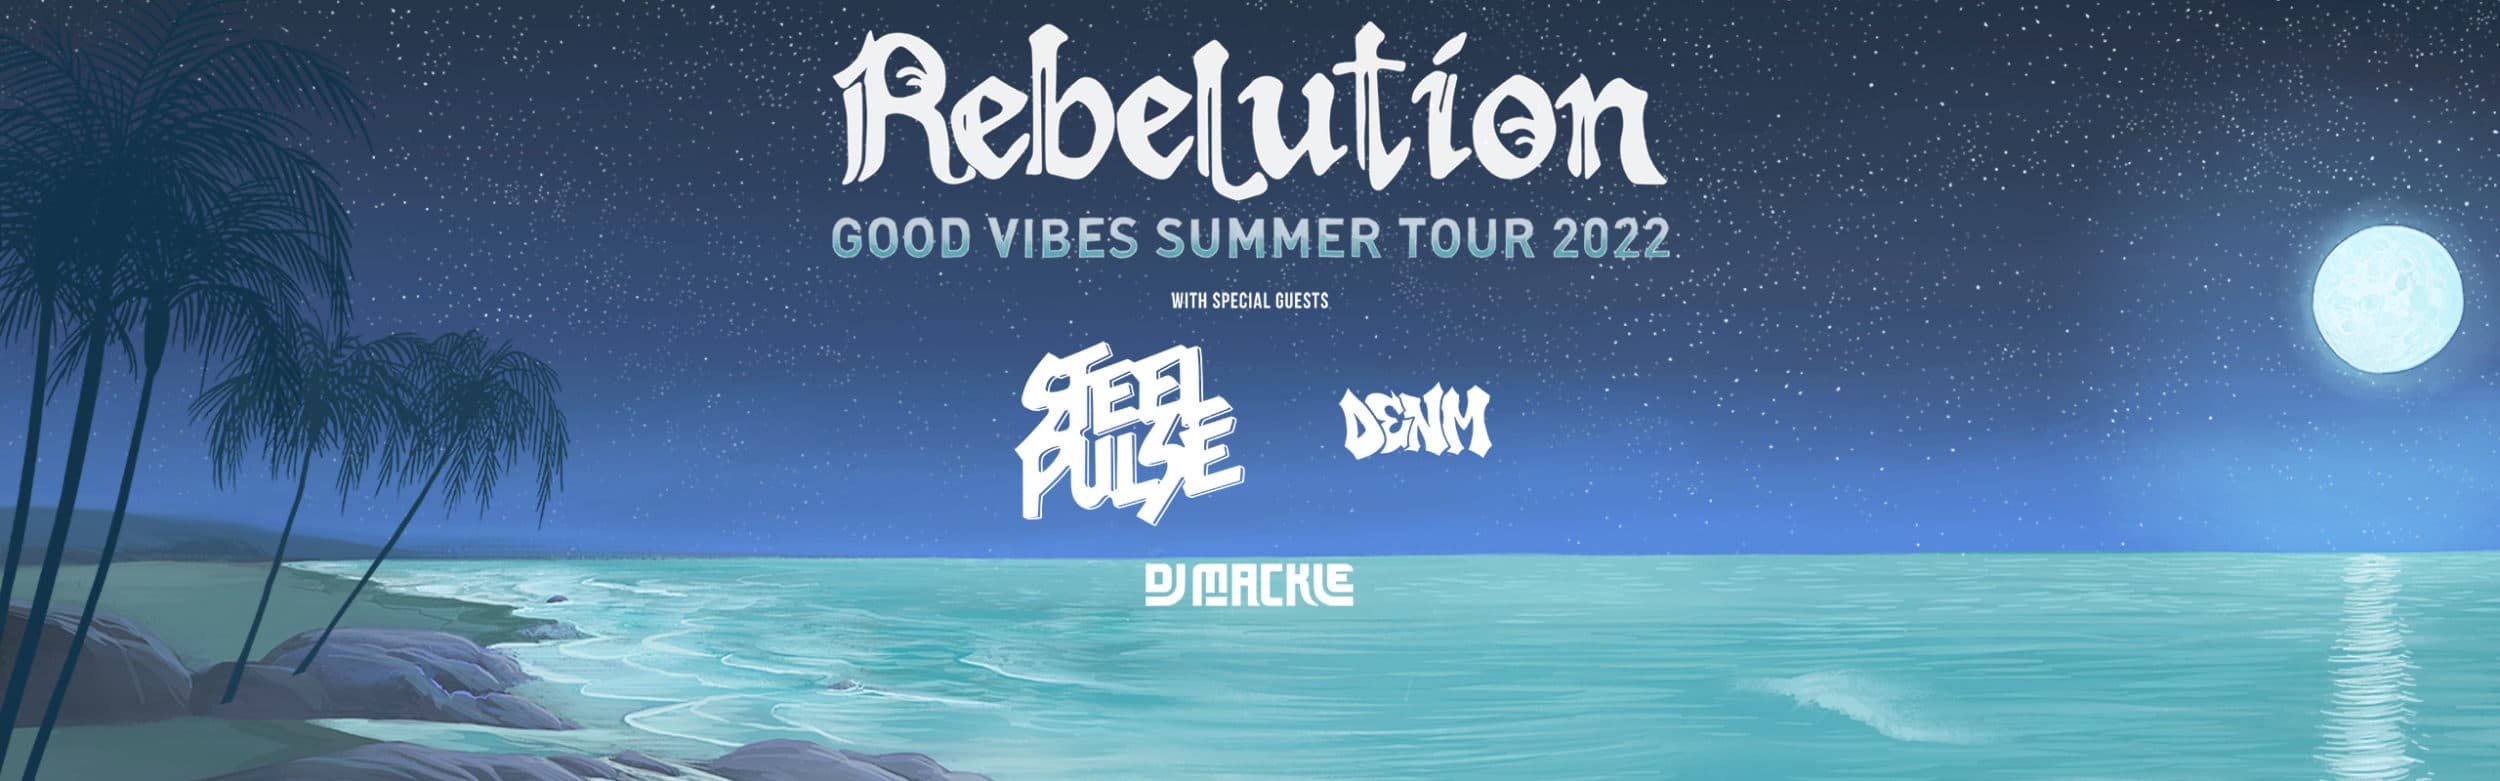 Rebelution: The Good Vibes Summer Tour 2022